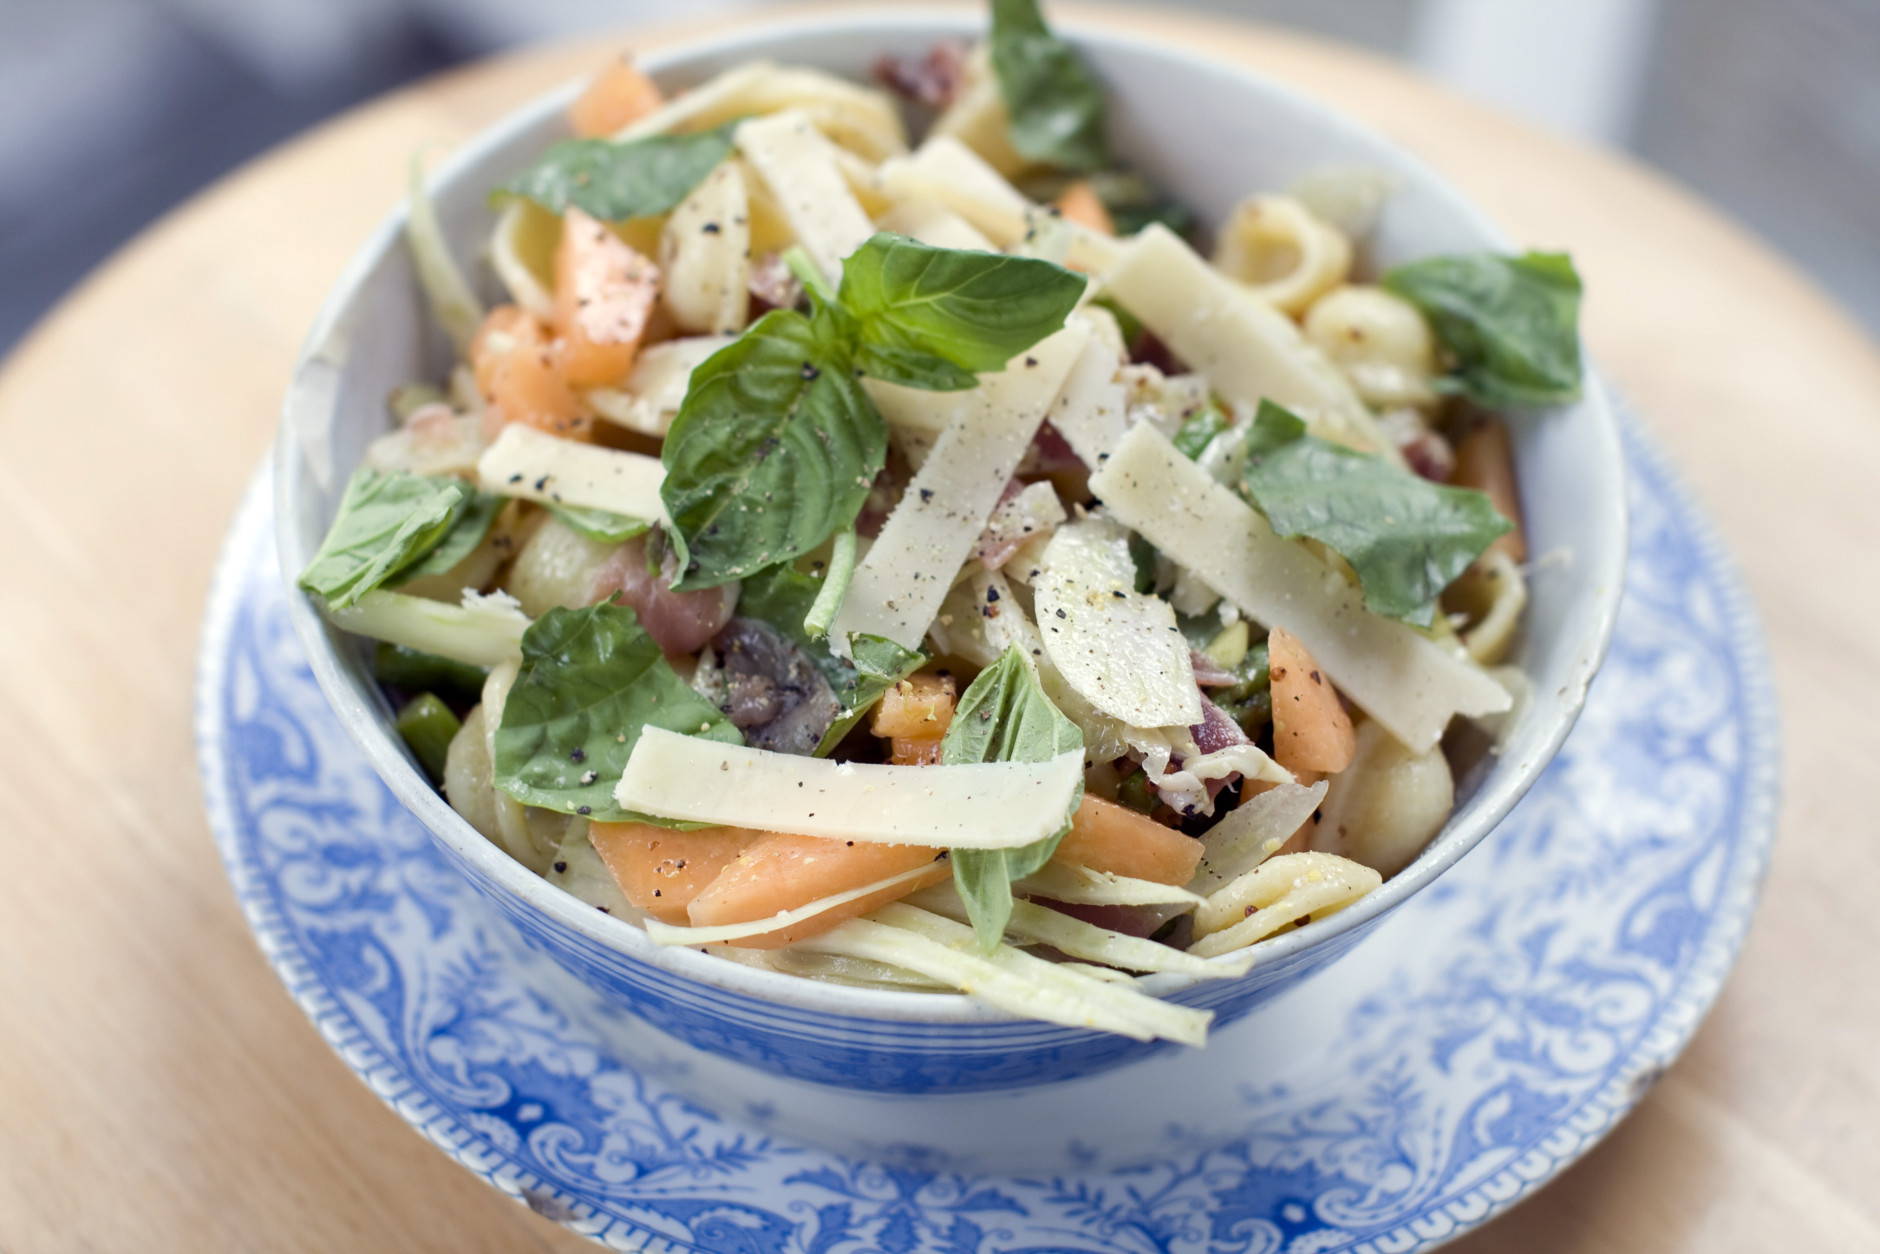 This July 29, 2013 photo shows prosciutto, cantaloupe, and orecchiette salad in Concord, N.H. A pasta salad should be easy. It should be a just-throw-the-ingredients-in-a-bowl kind of summer food that doesn't require too much messing around. (AP Photo/Matthew Mead)